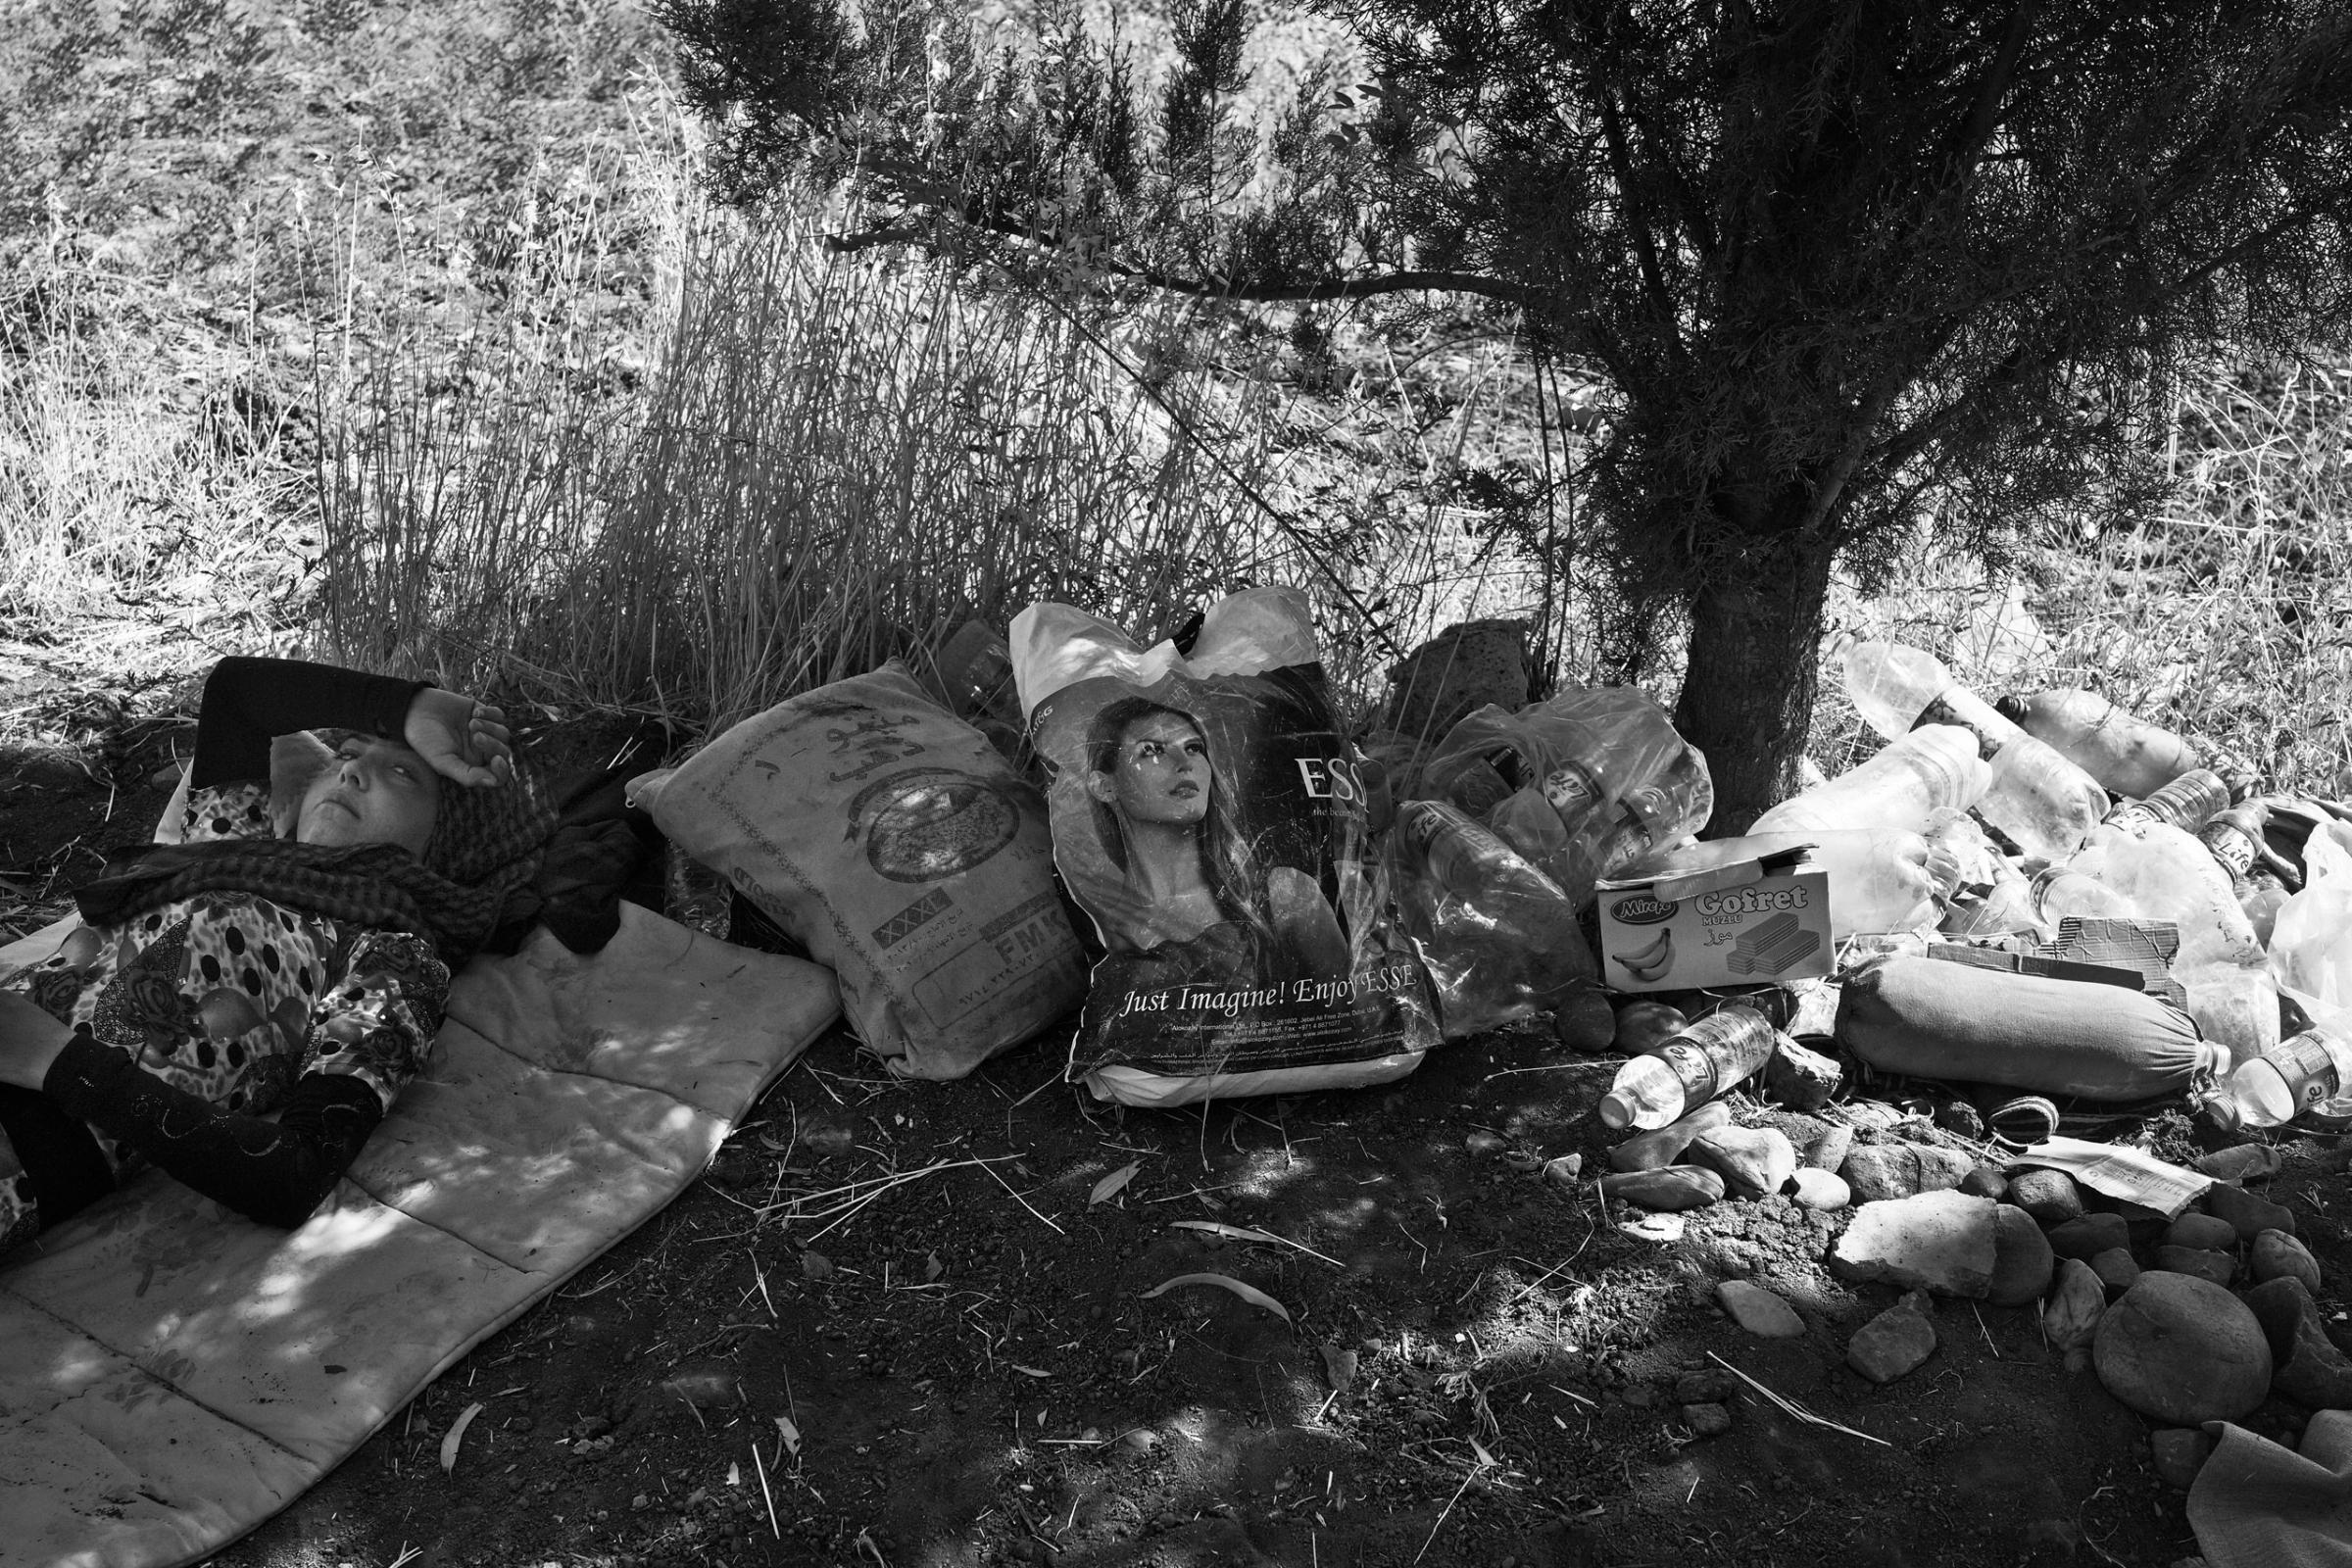 Nada, a 12-year-old Yezidi girl from Sinjar, rests under a tree next to her family's belongings shortly after crossing into Kurdish-controlled Dohuk Province. Fishkhabur, Iraq. Aug. 11, 2014.